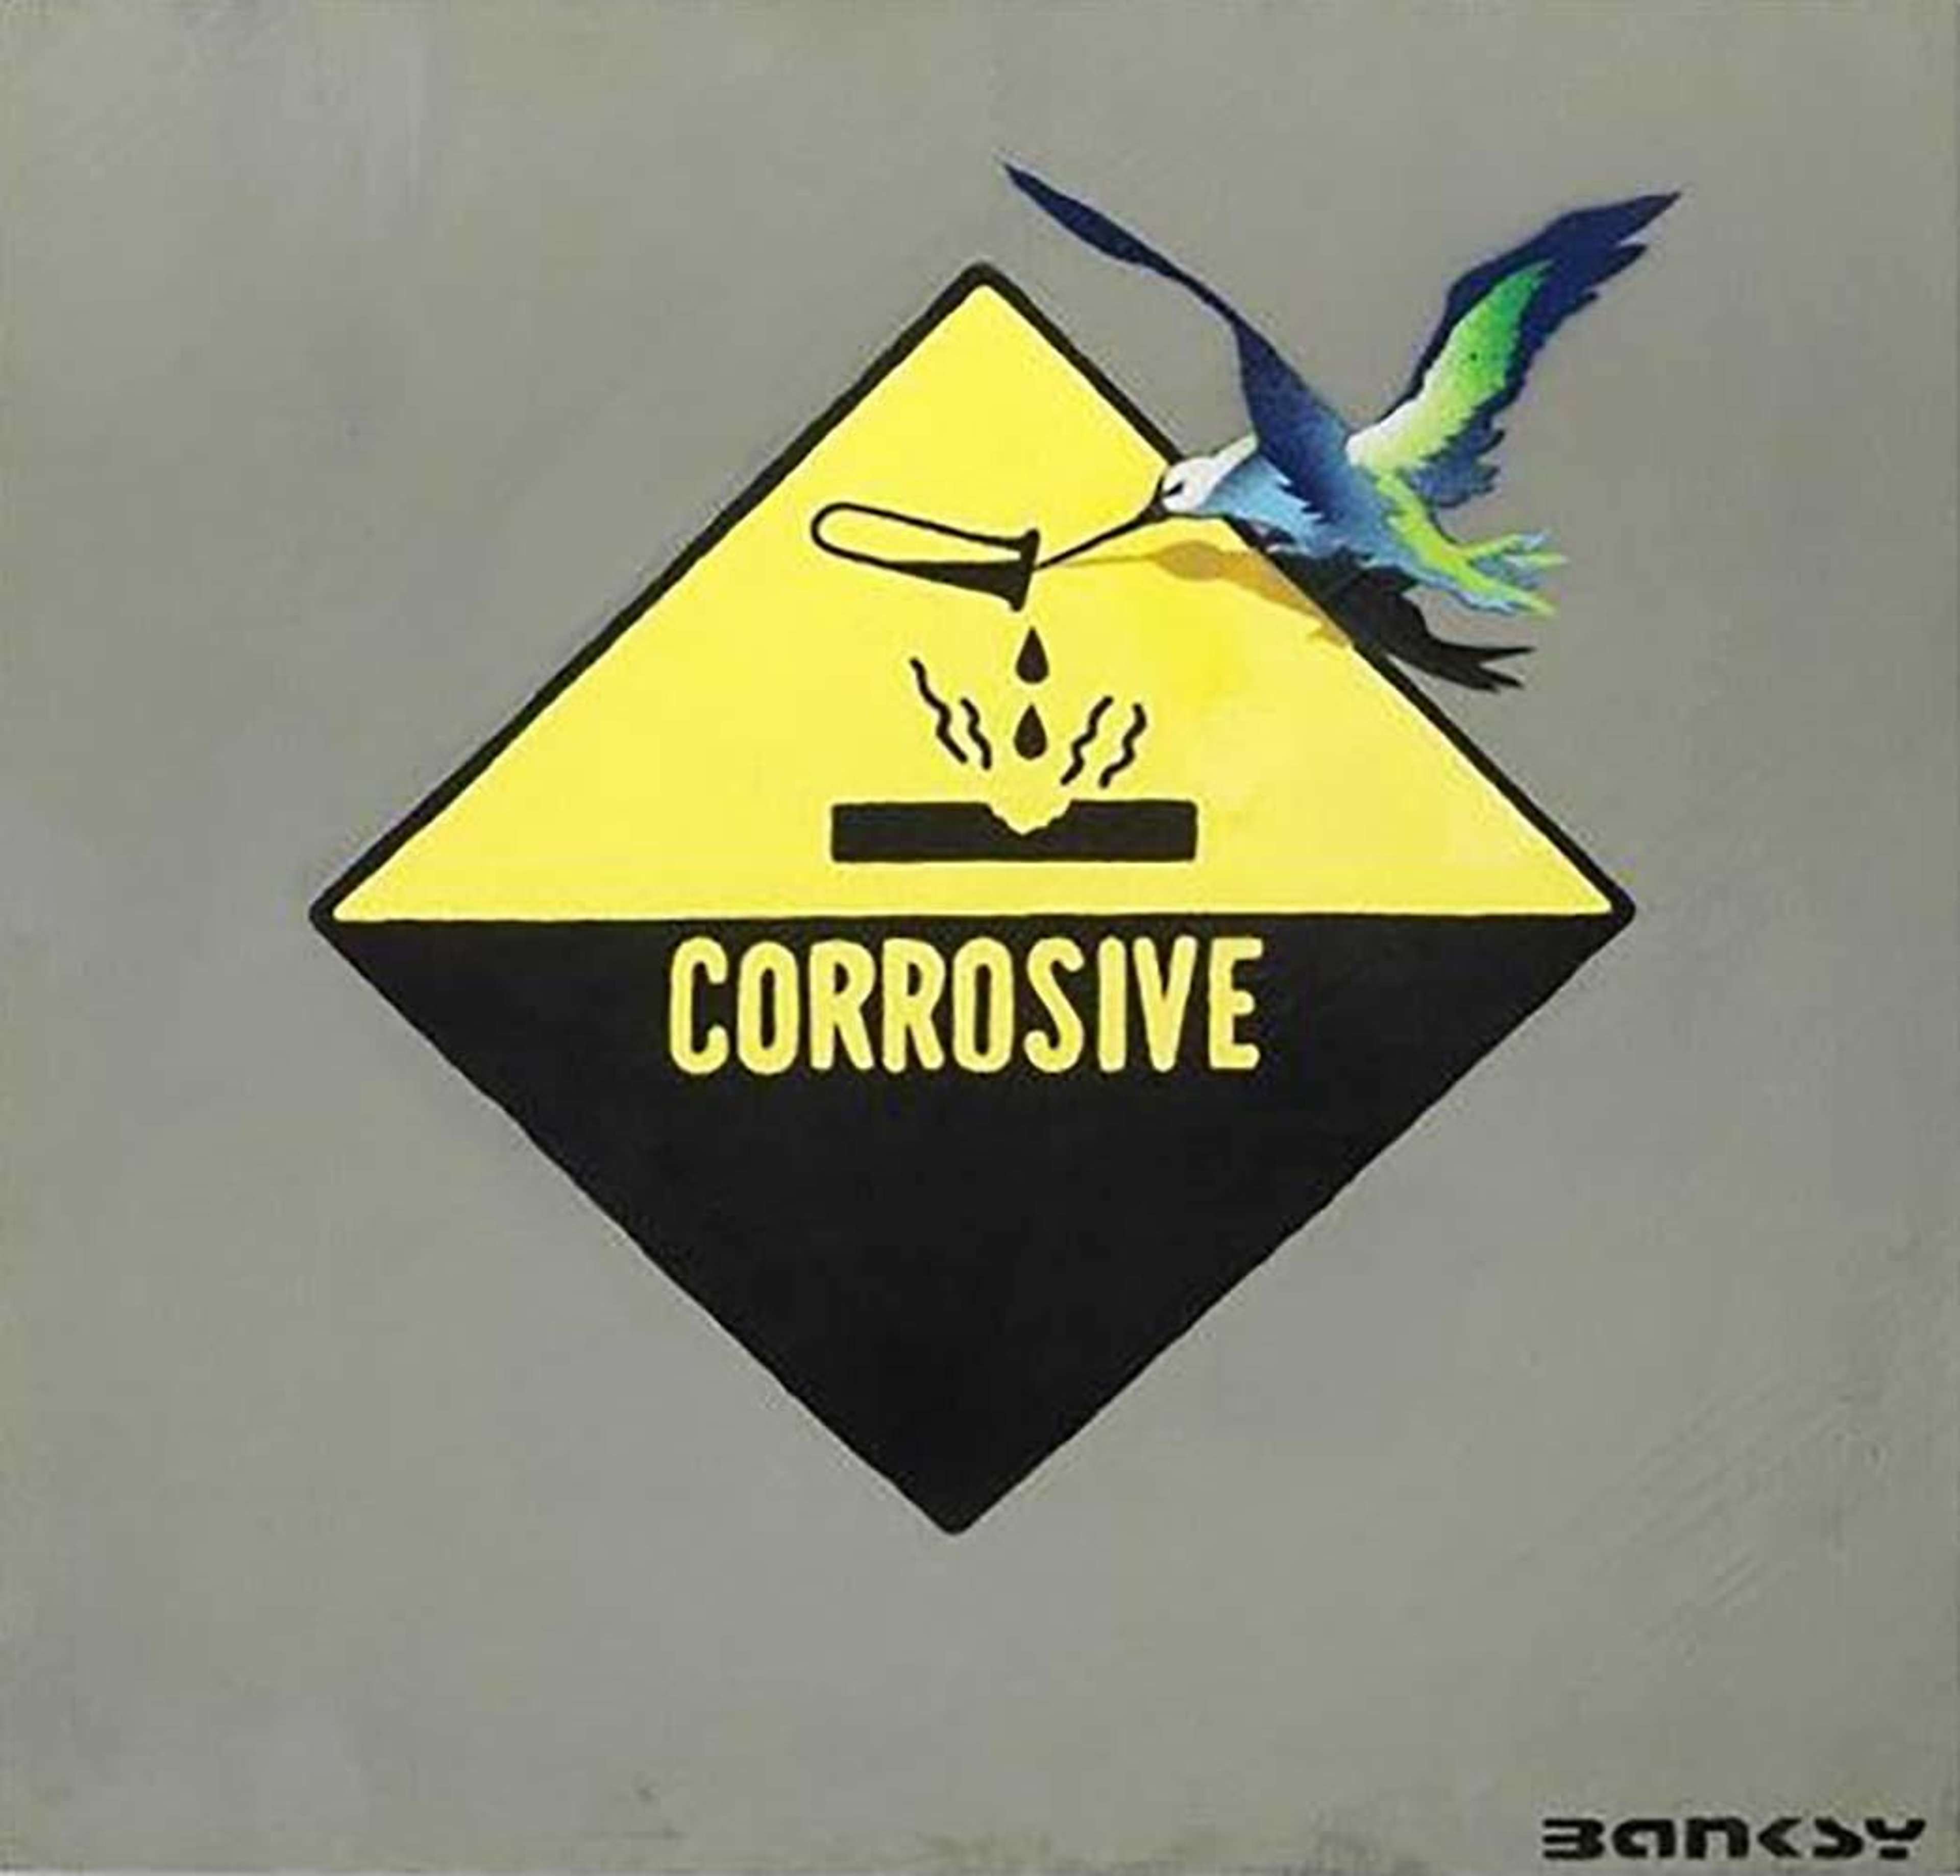 Banksy's Corrosive Bird. A stenciled work of a humming bird in front of a yellow and black sign that reads "CORROSIVE."